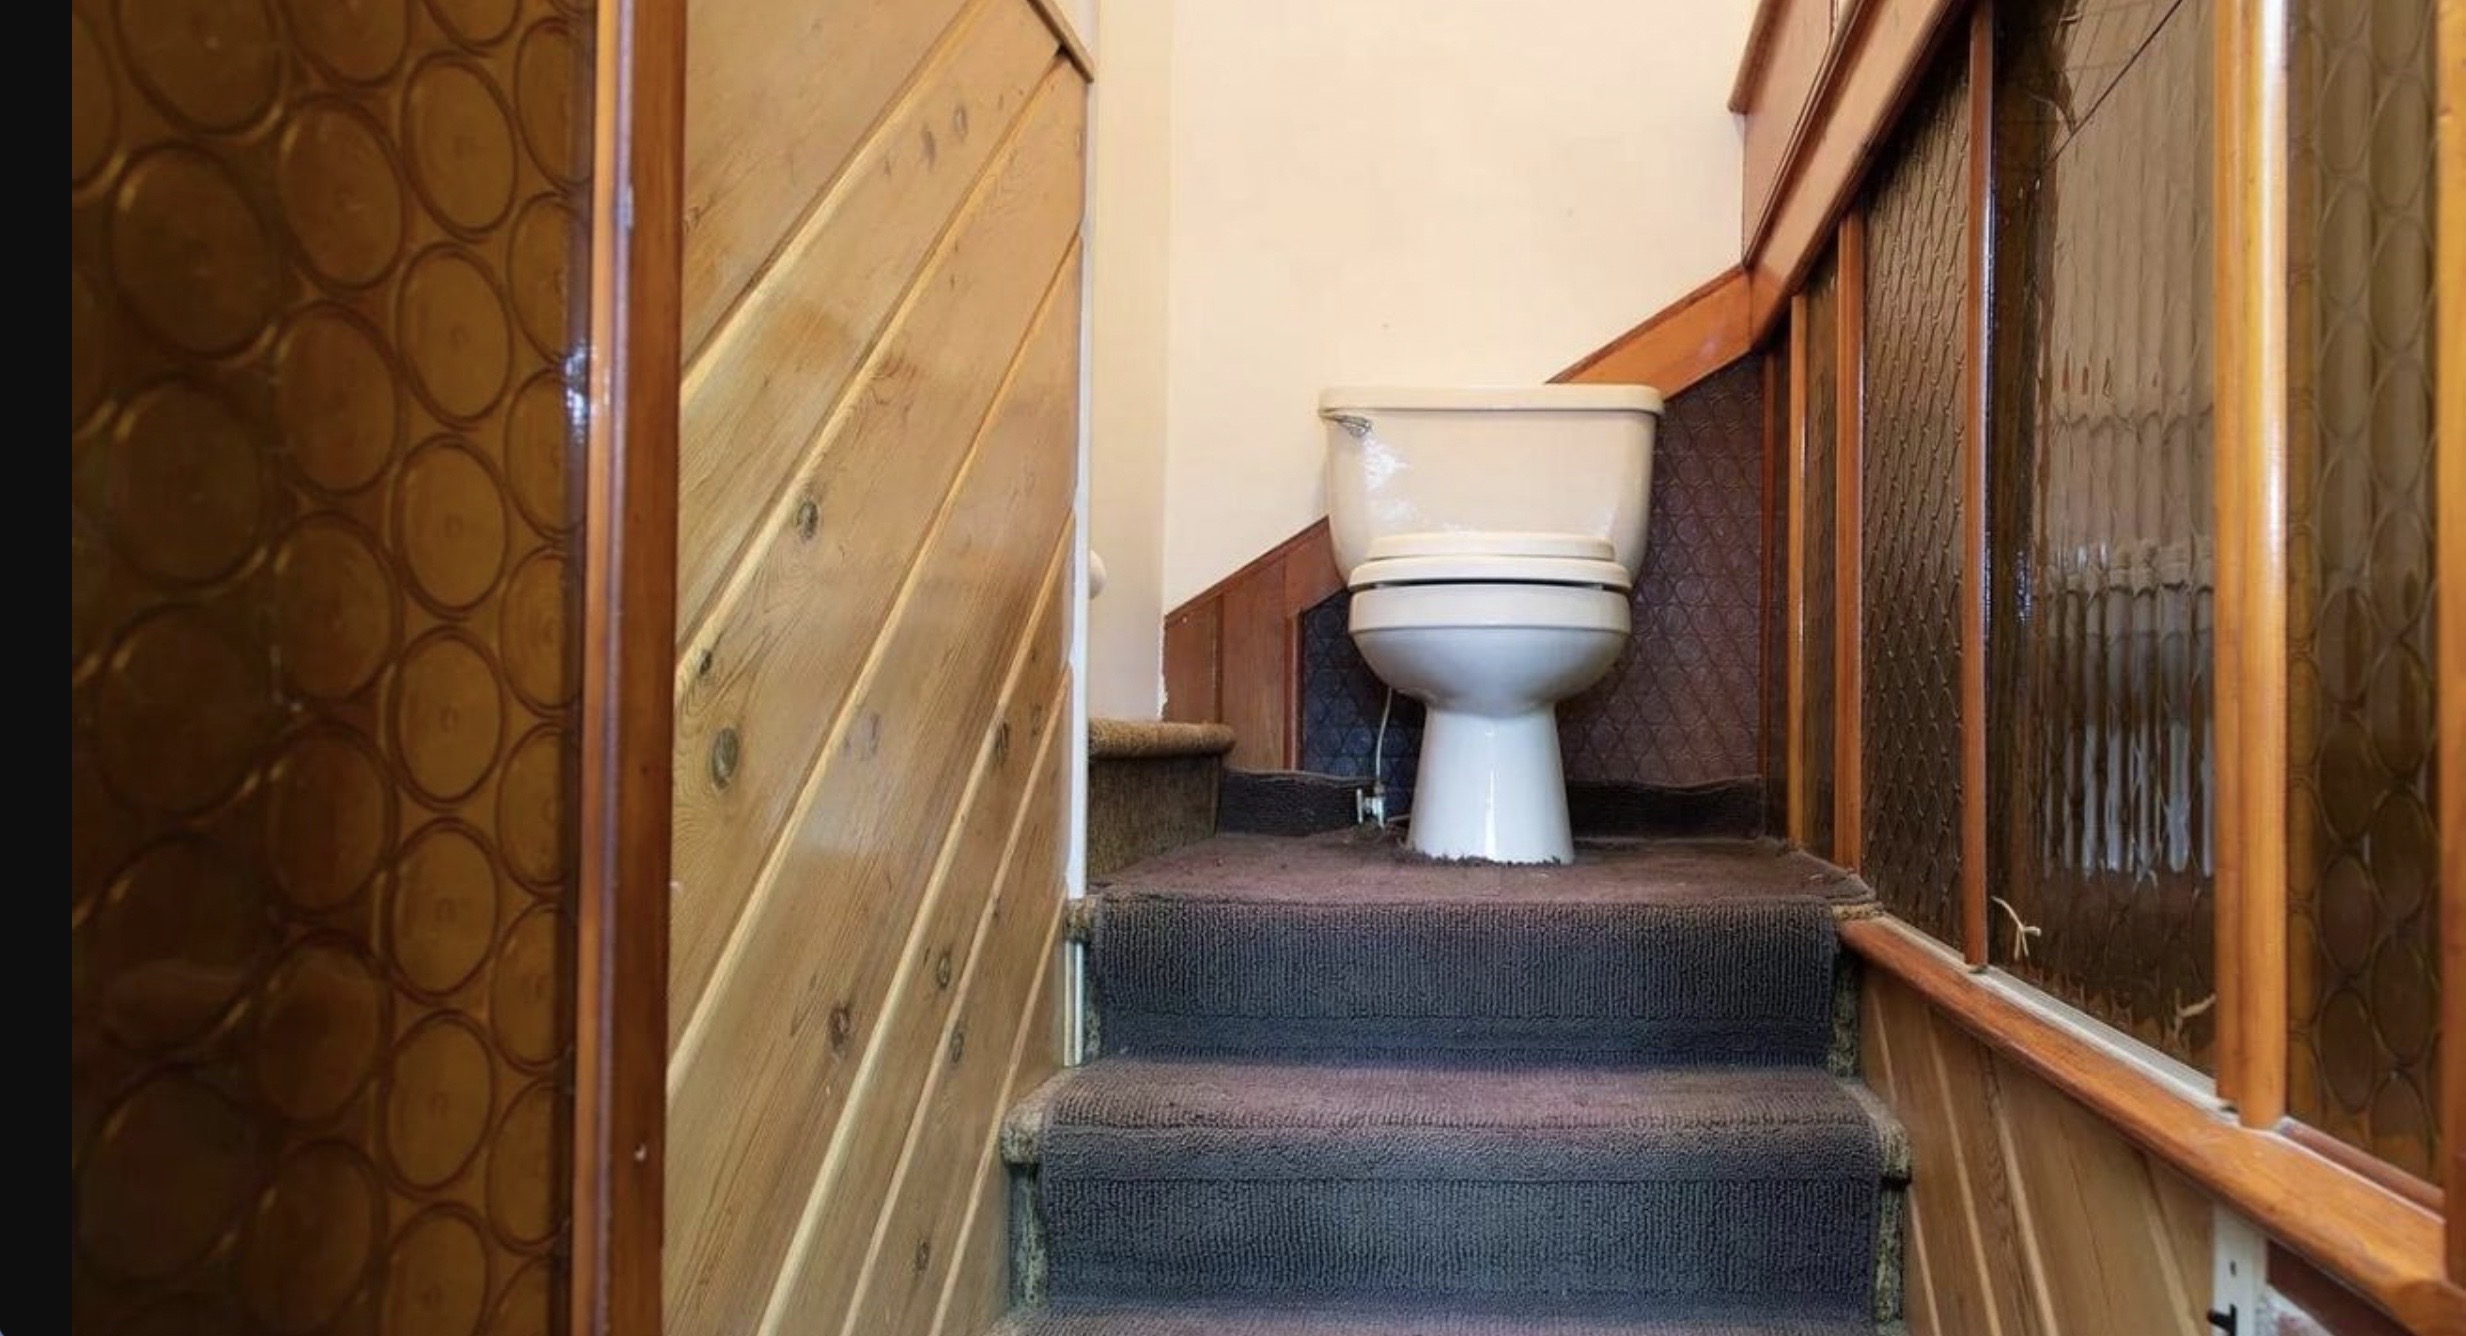 Newton PA house with toilet on landing photo from zillow